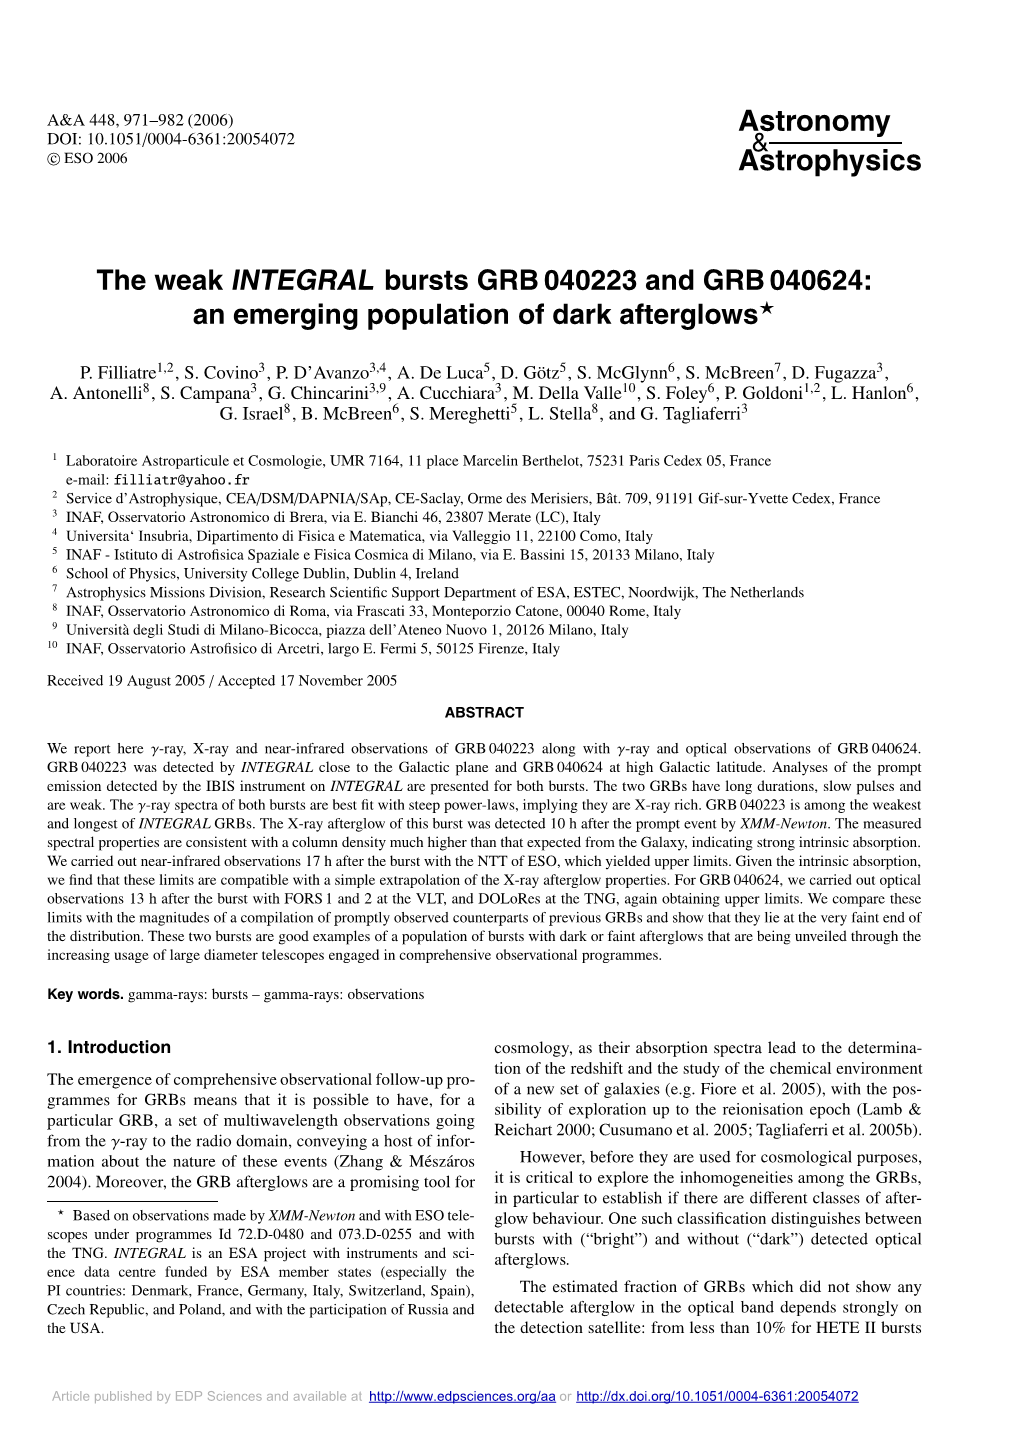 The Weak INTEGRAL Bursts GRB 040223 and GRB 040624: an Emerging Population of Dark Afterglows